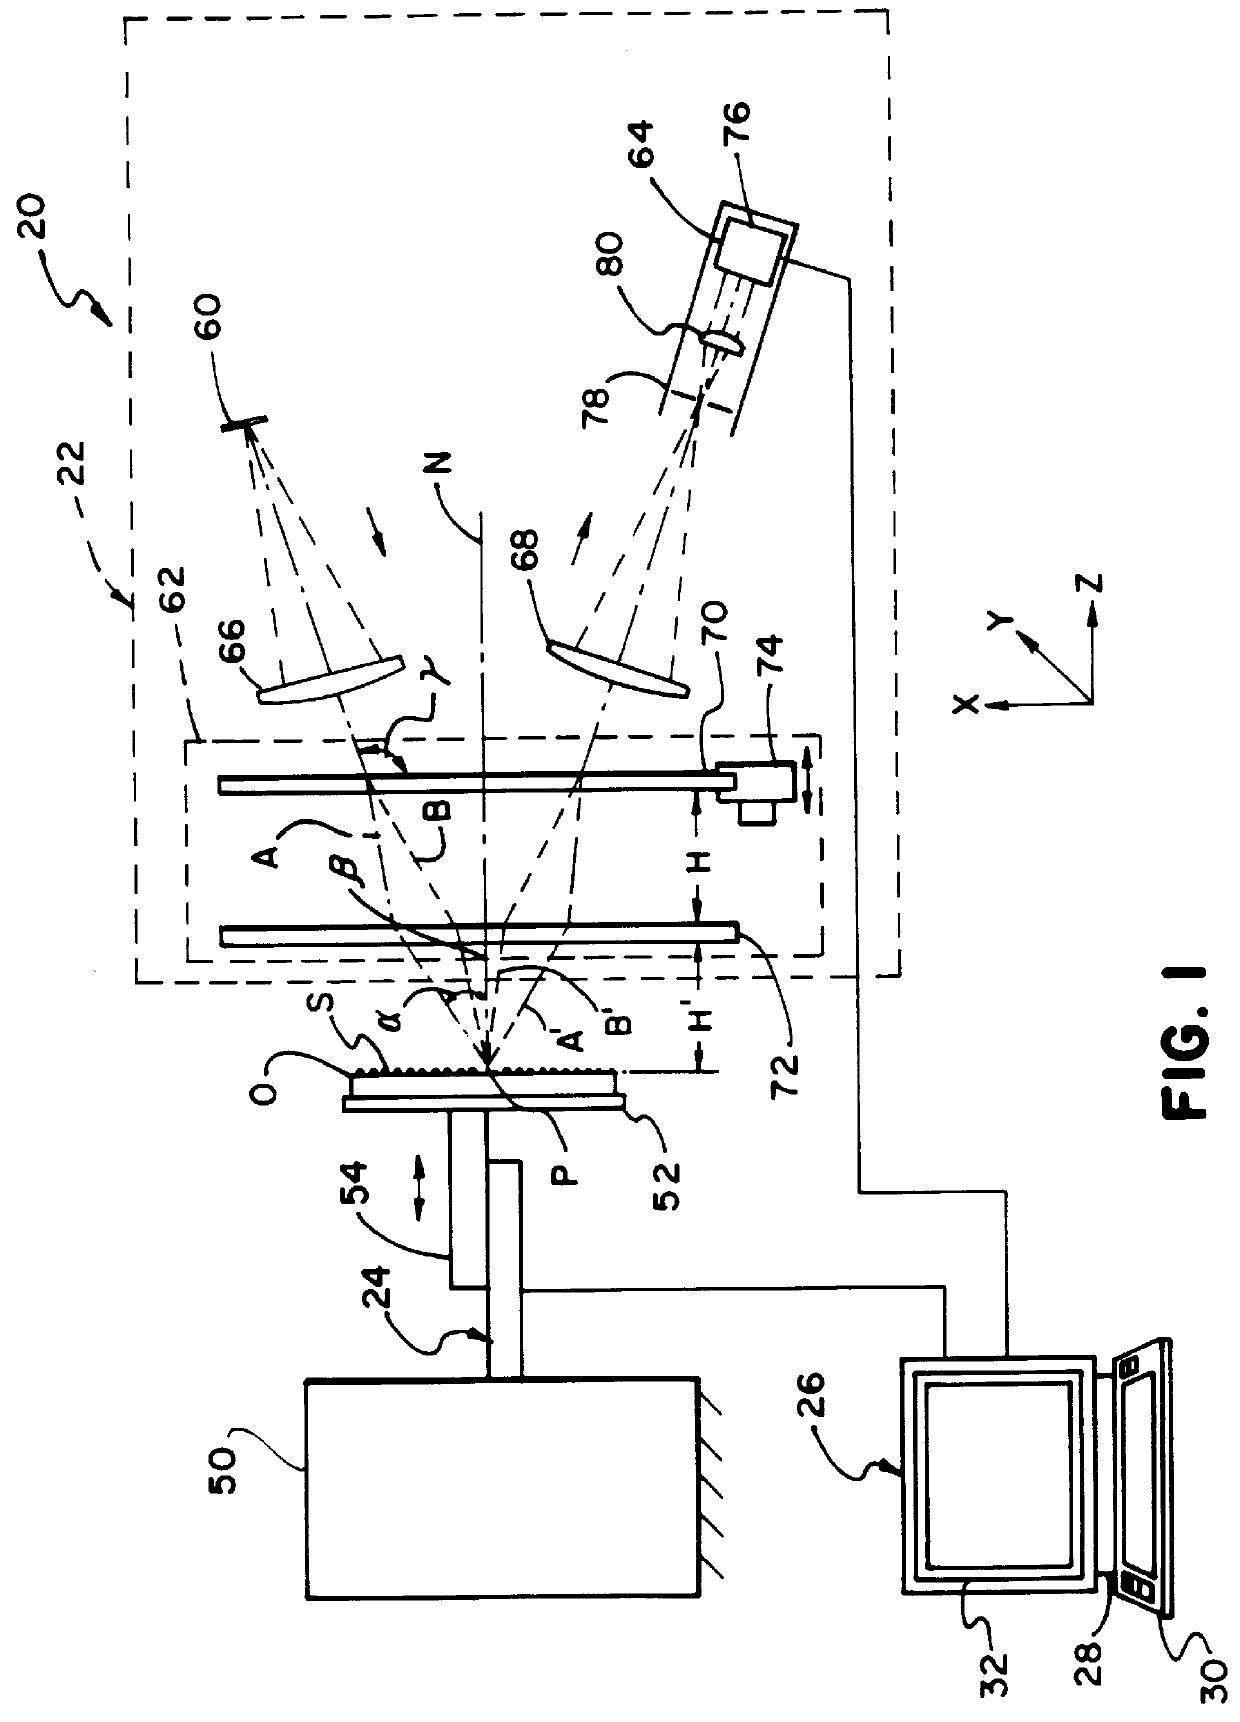 Geometrically-desensitized interferometer incorporating an optical assembly with high stray-beam management capability